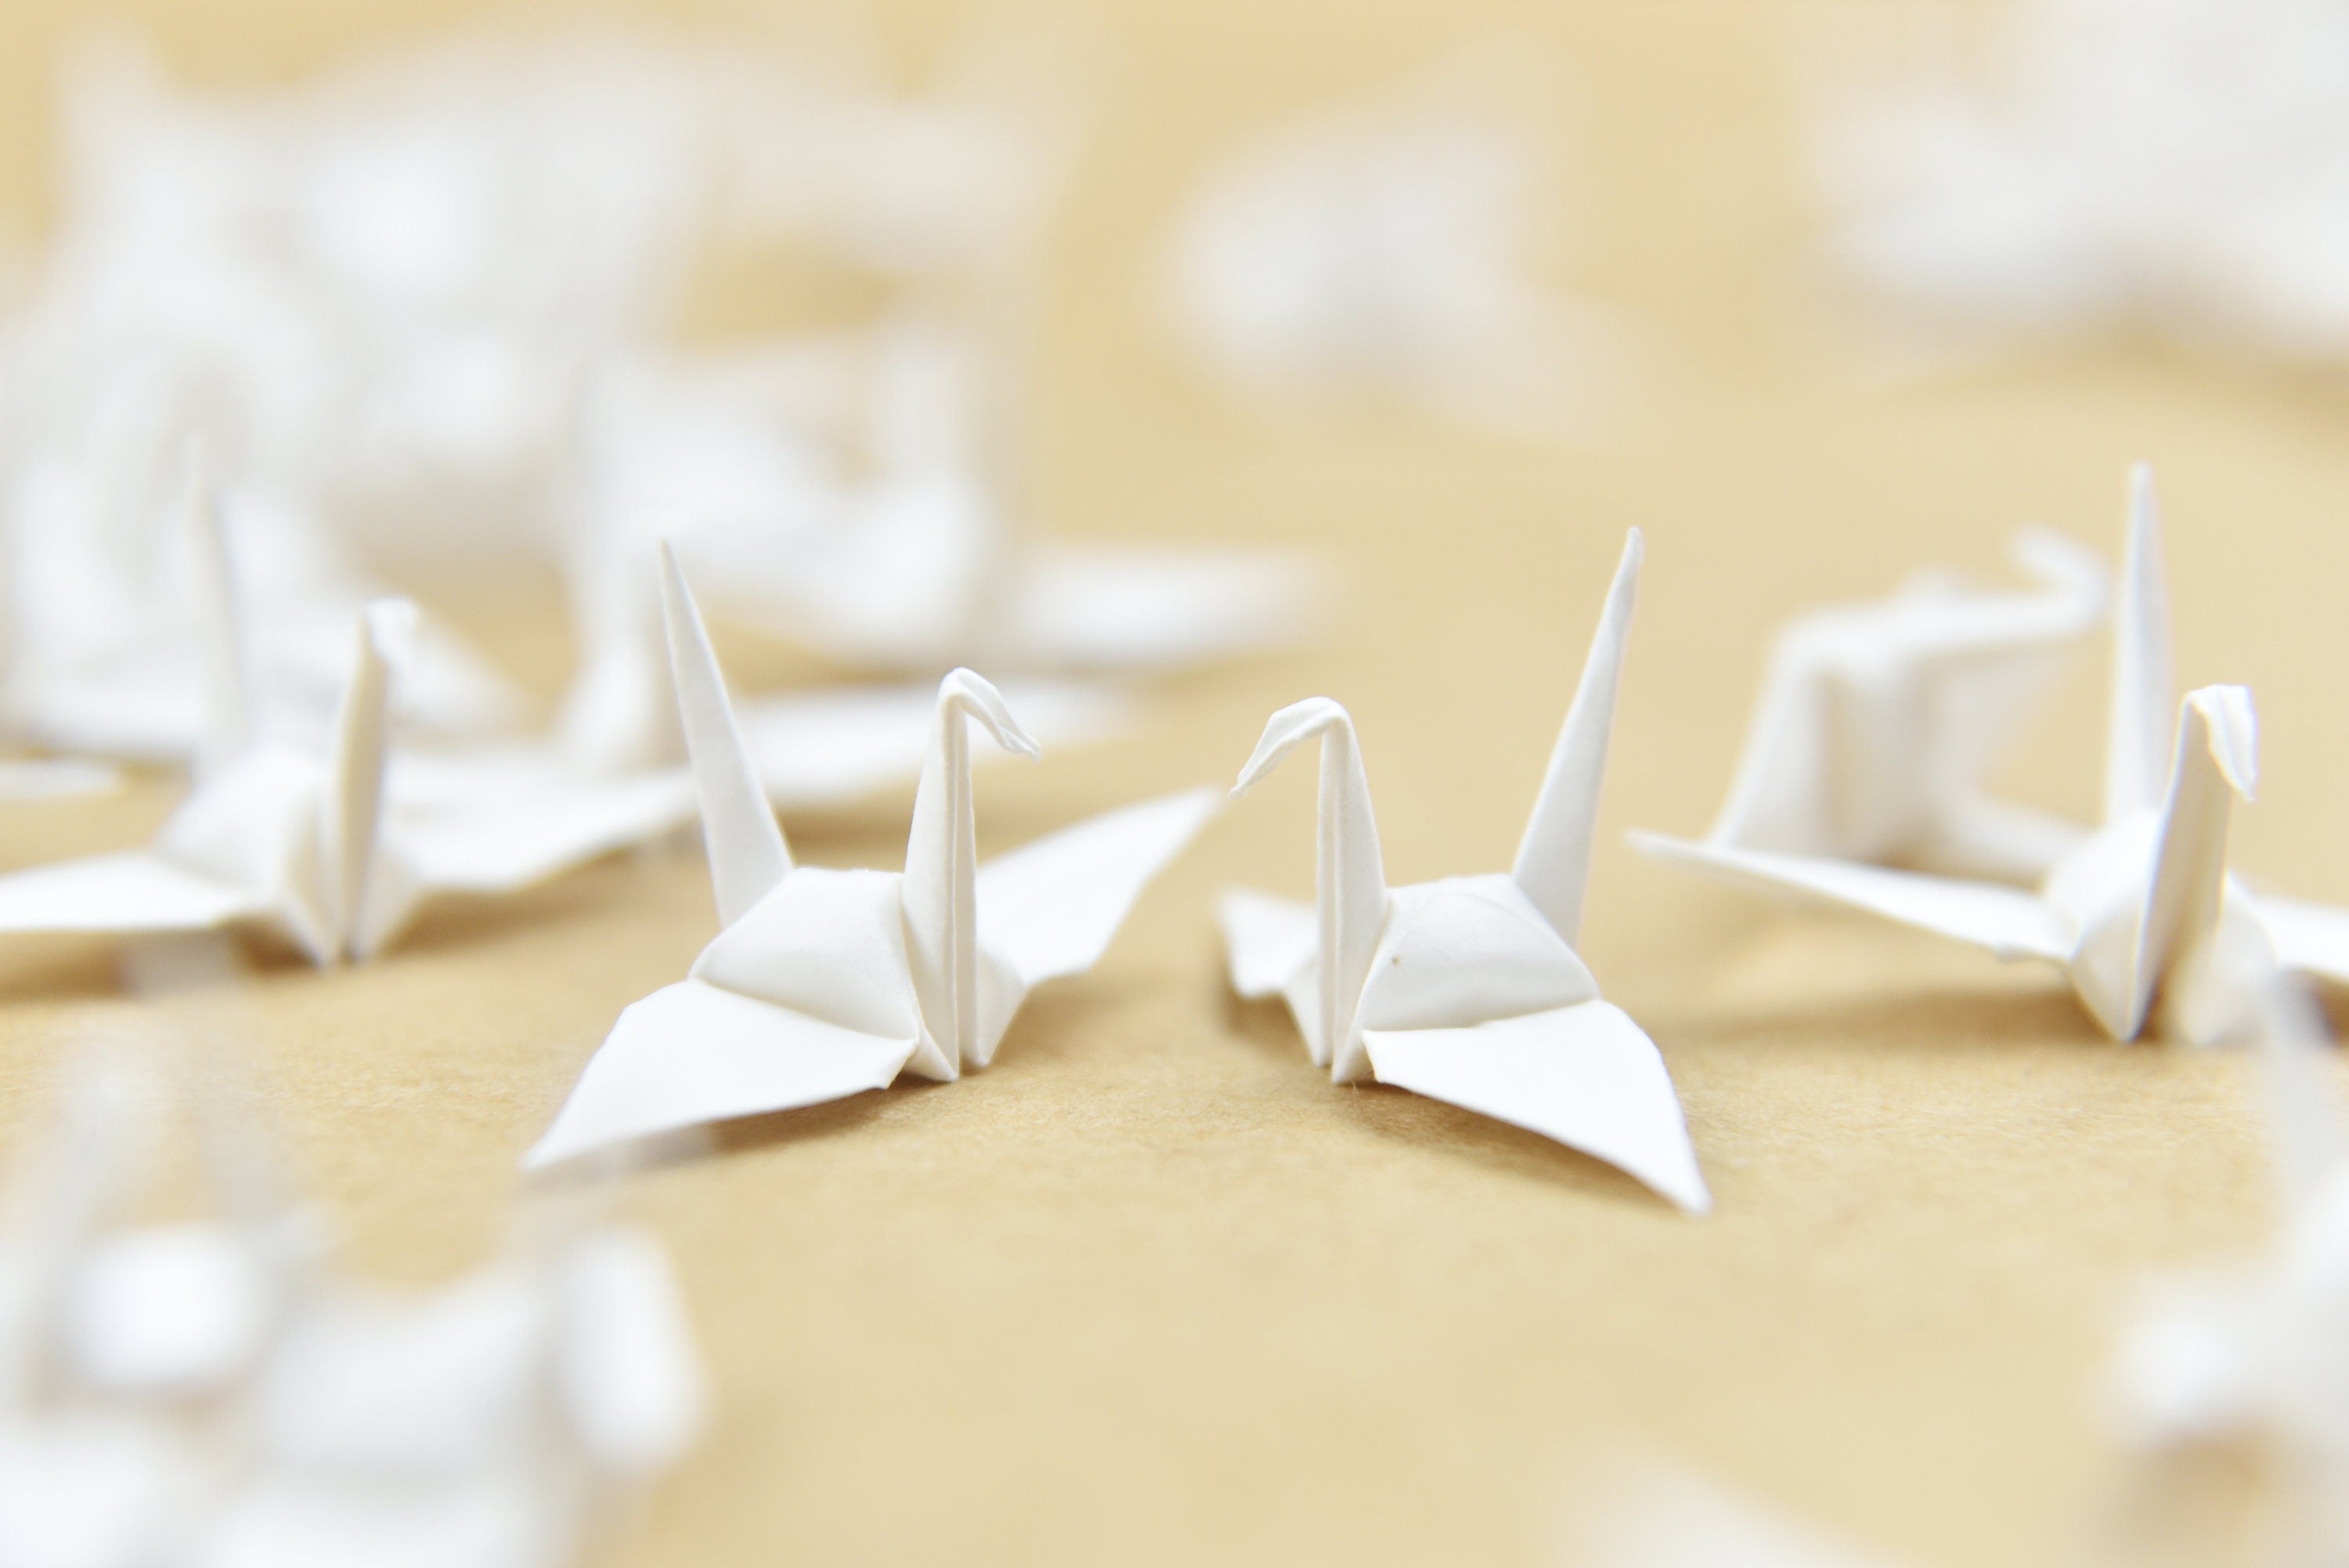 100 Origami Crane Ivory 1.5 inches for Wedding Decor, Anniversary Gift, Valentines, Backdrop